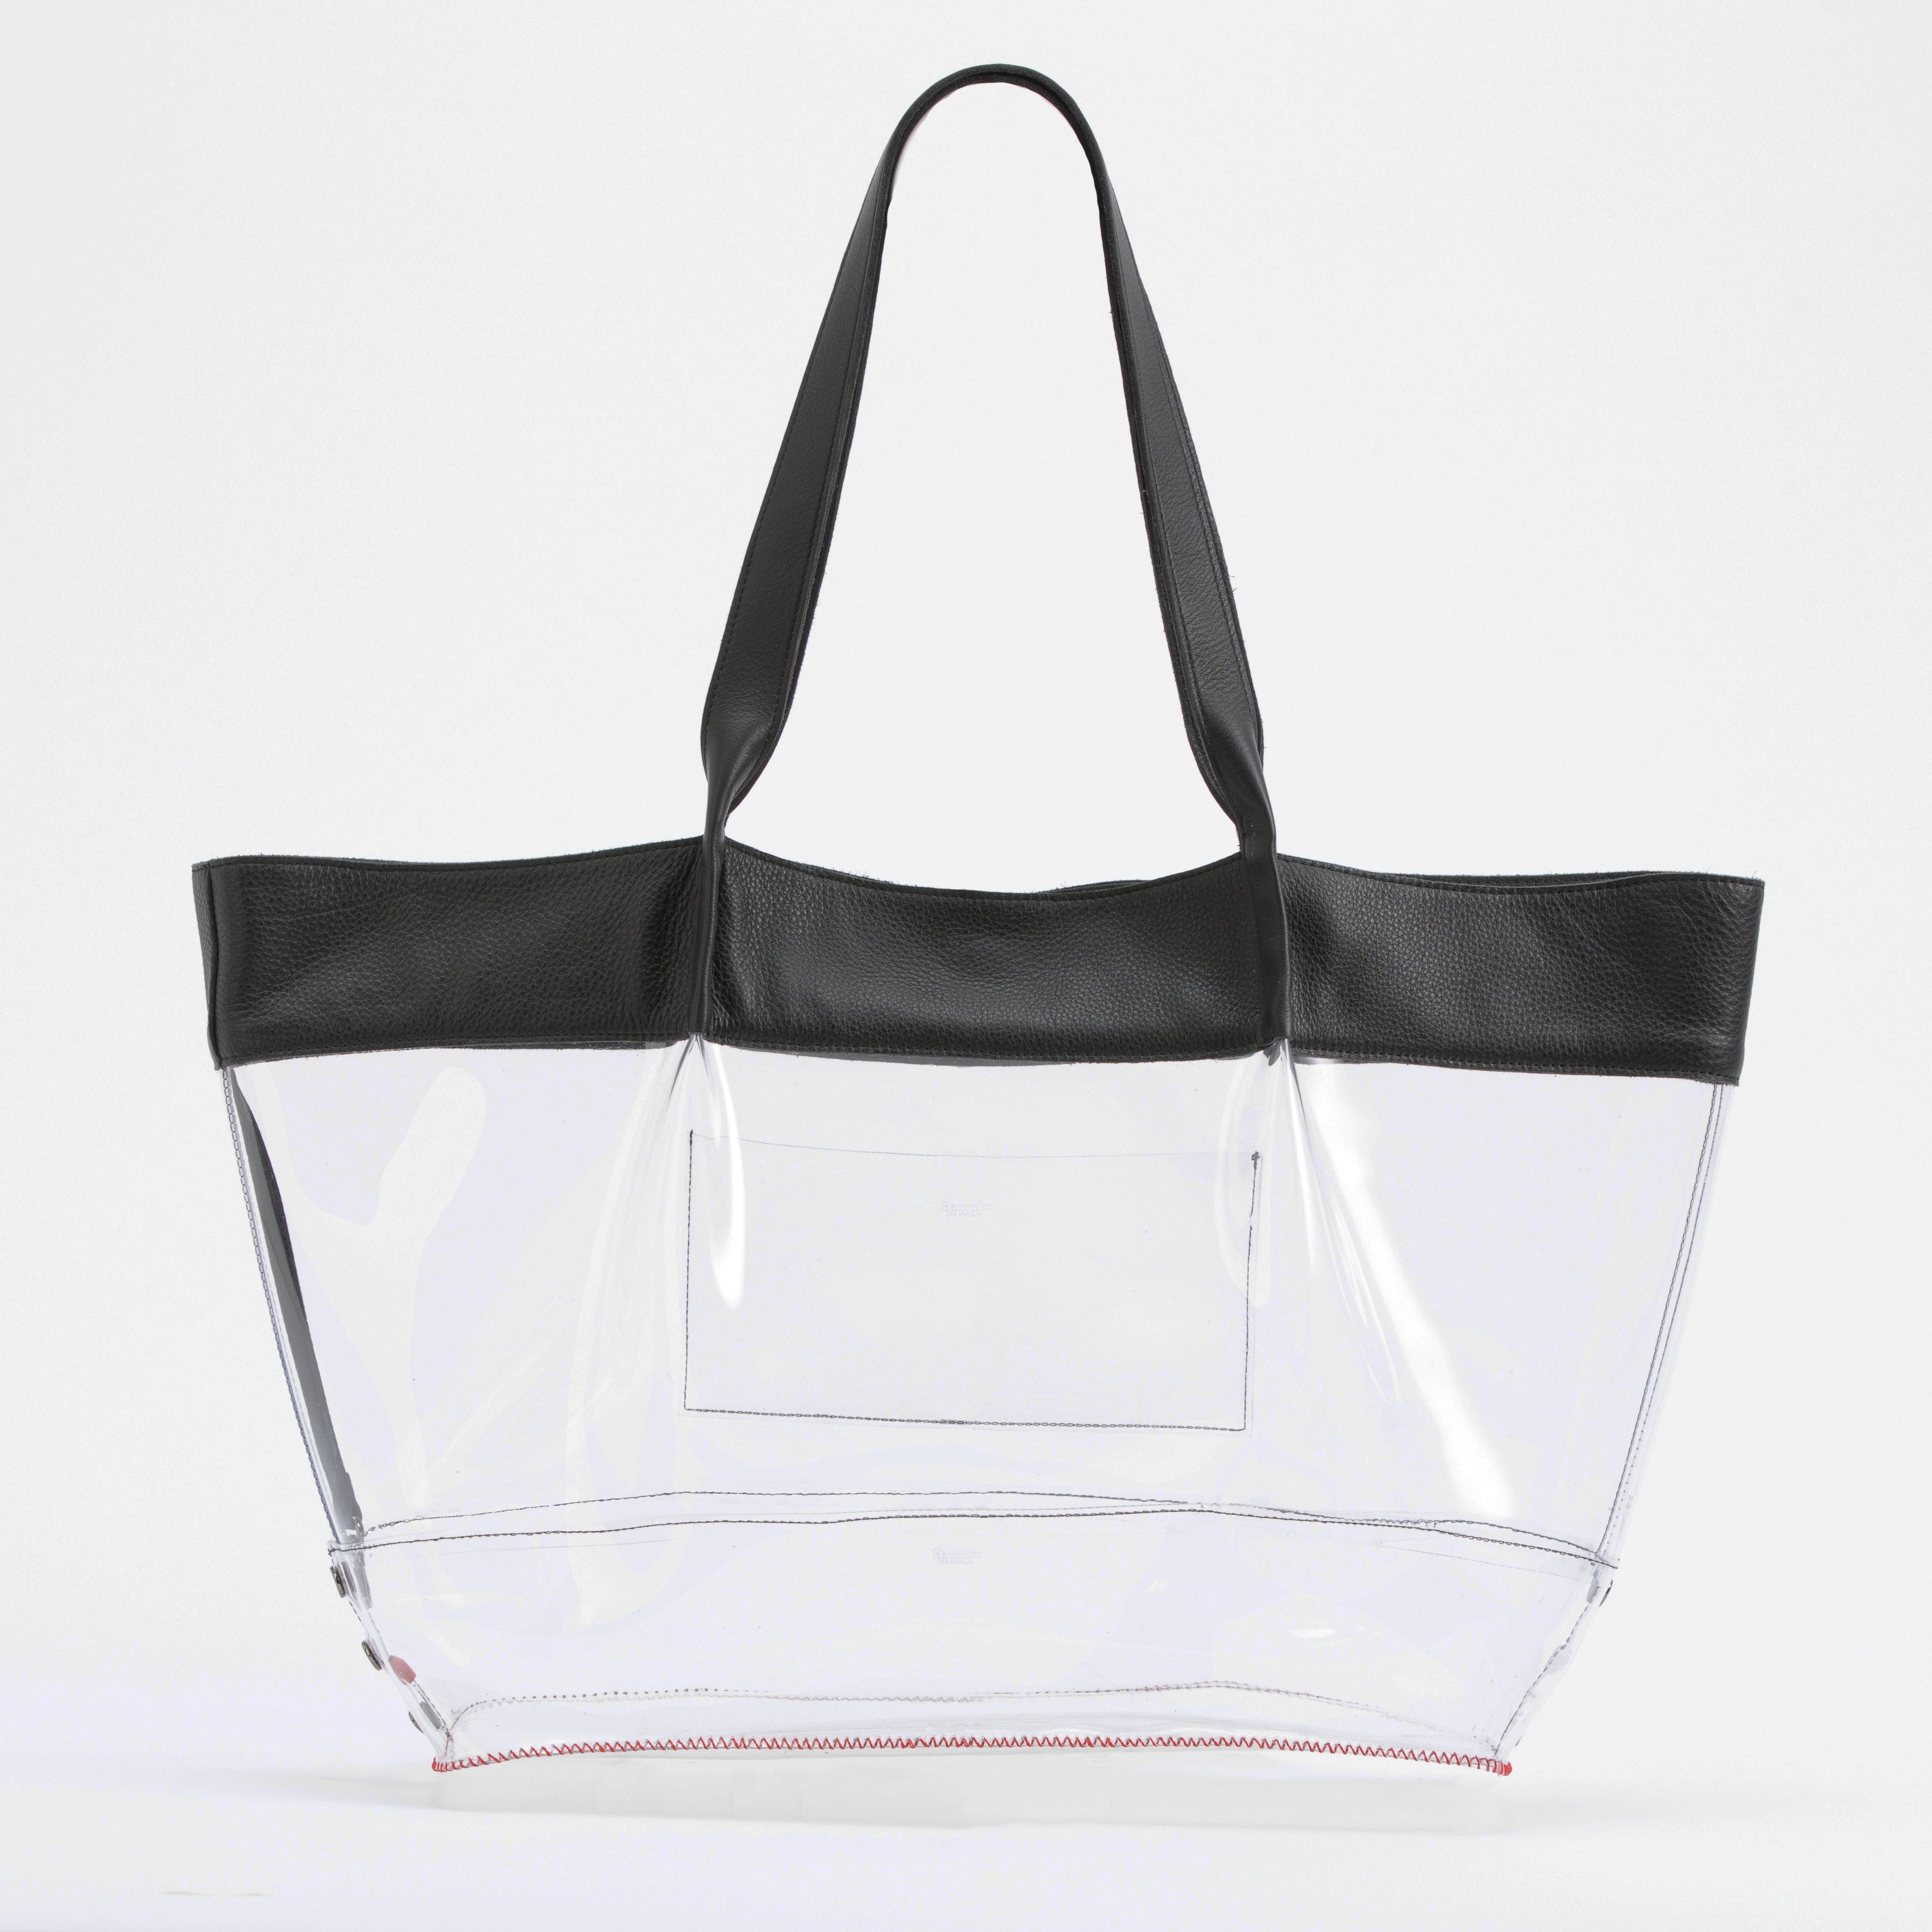 Women's Functional and Stylish Leather Tote Bags – Hammitt